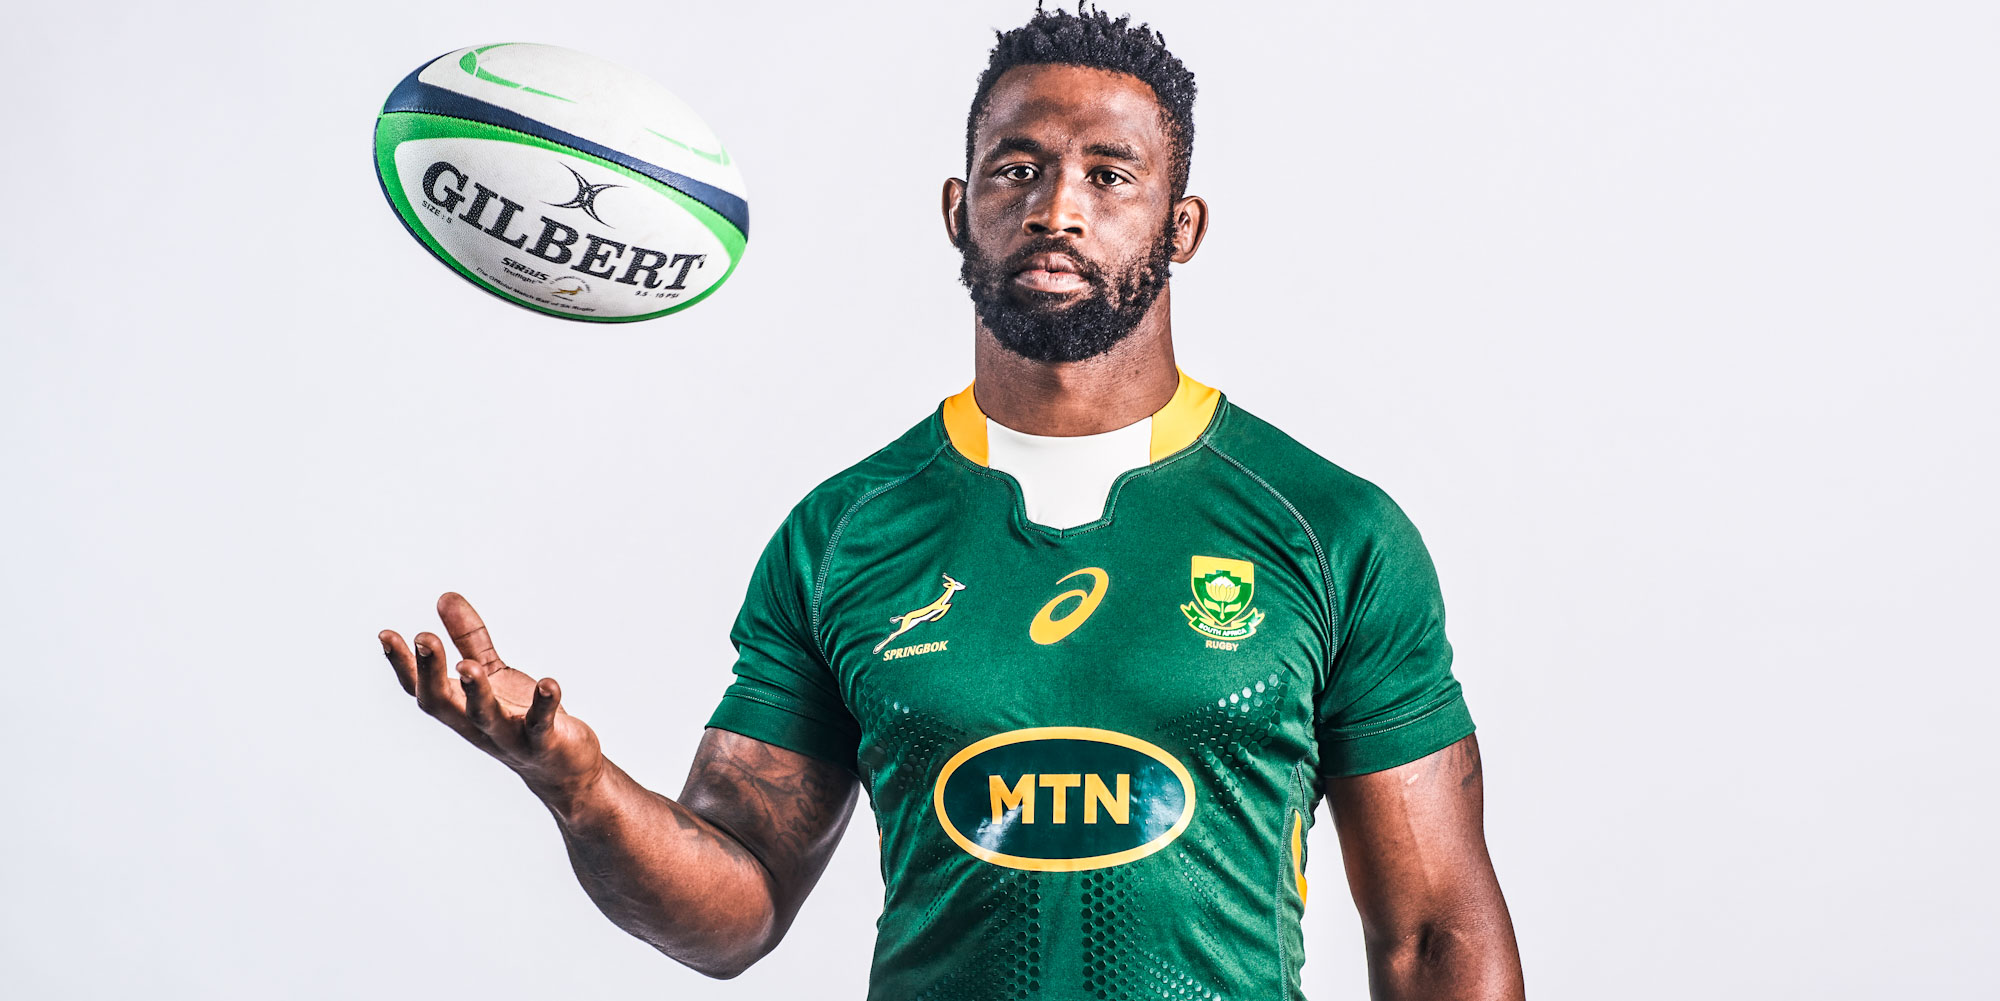 Siya Kolisi will lead the Boks in their first Test against Wales in South Africa since 2014.